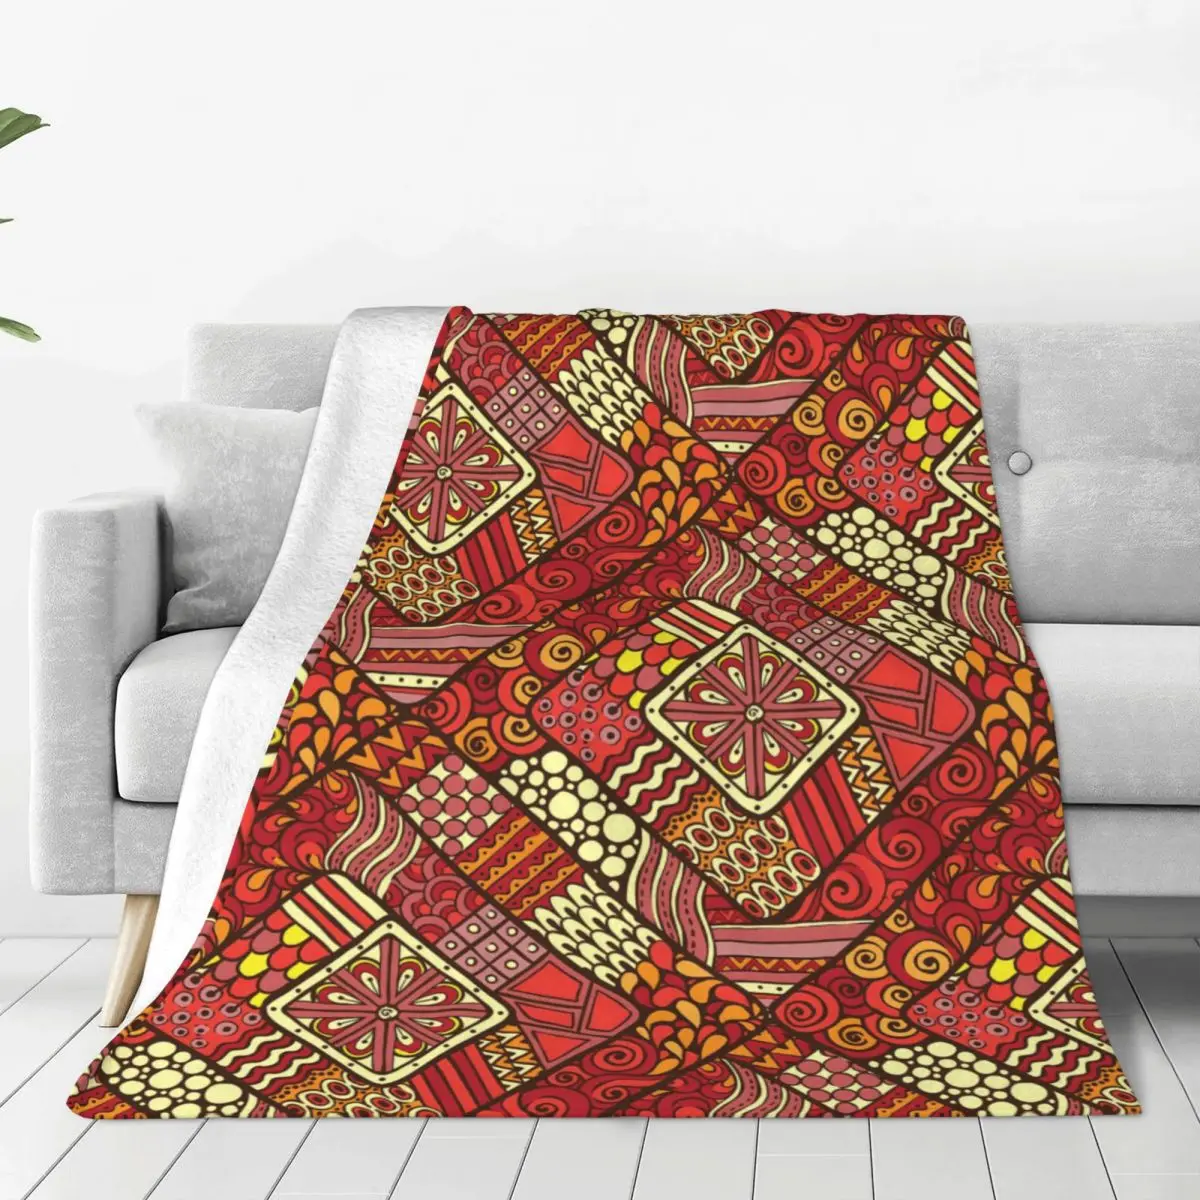 

Tribal Print Blankets Red Abstract Travelling Flannel Throw Blanket Soft Durable Living Room Design Bedspread Gift Idea